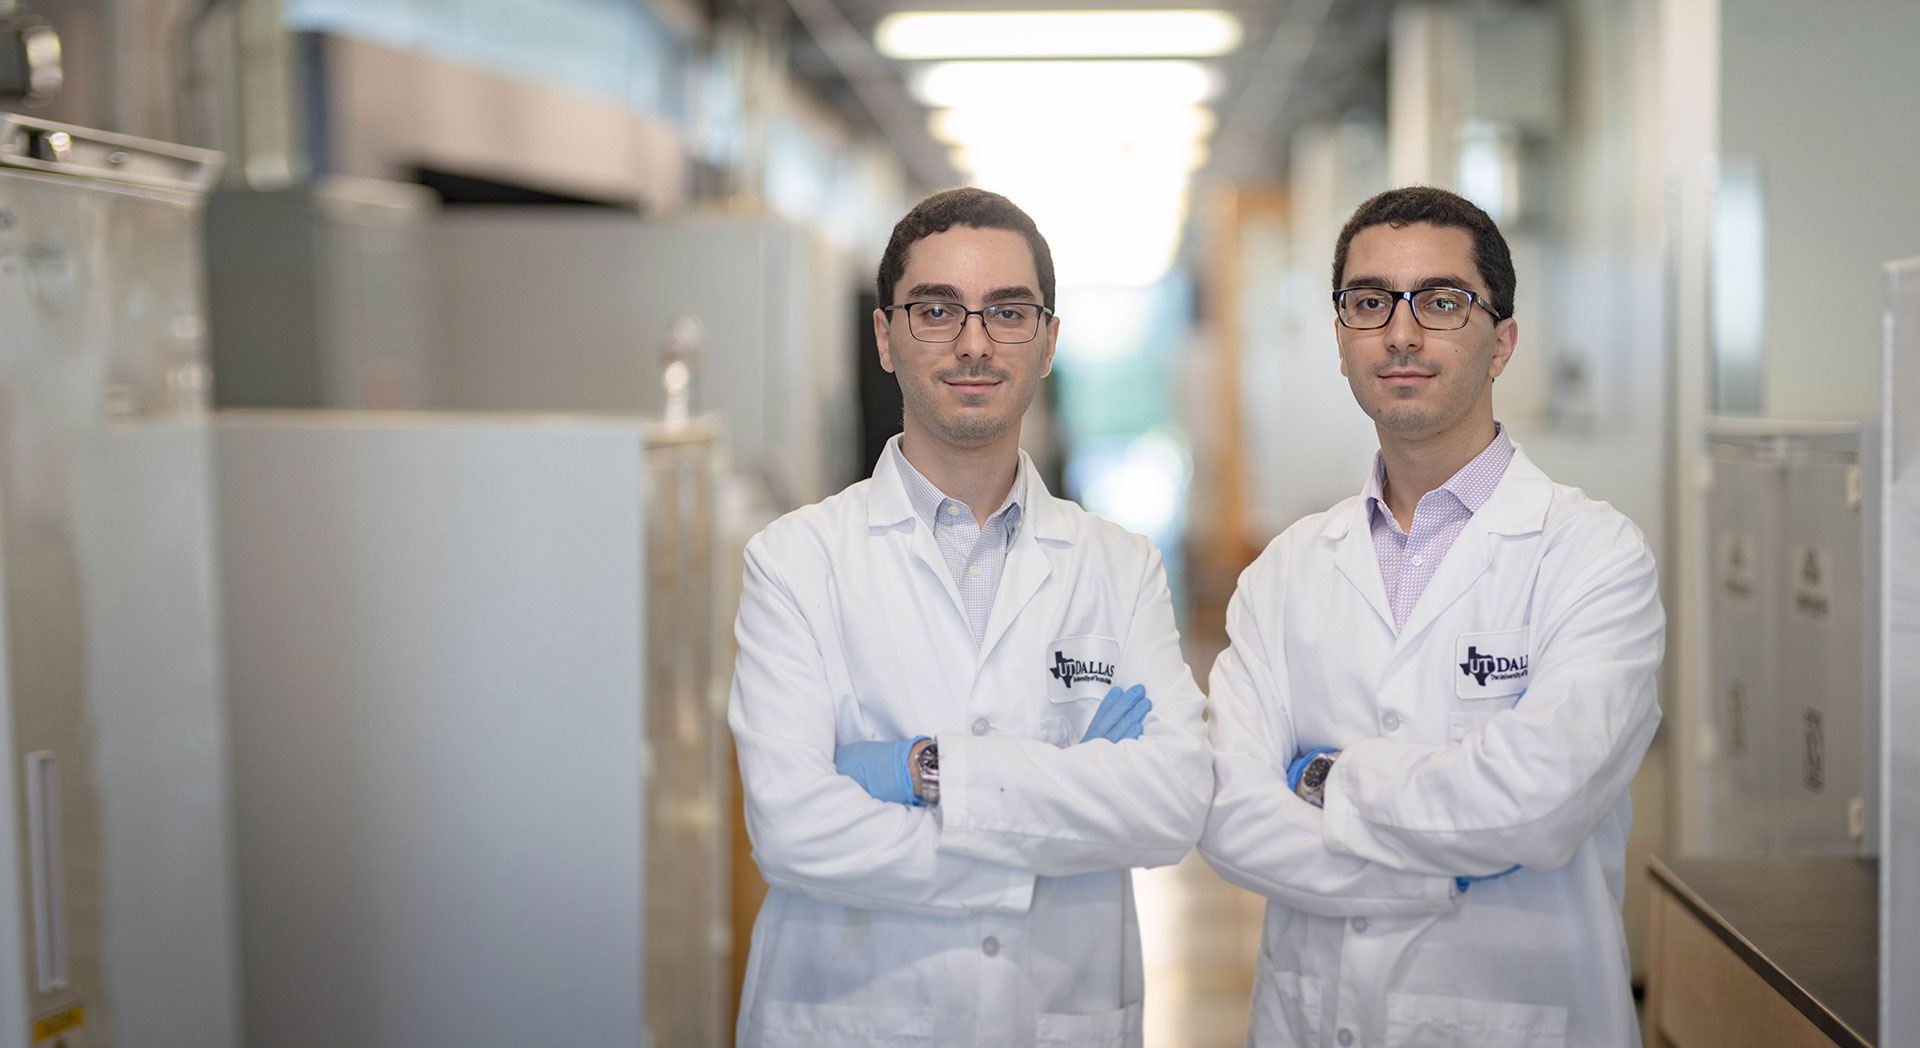 Parsa and Pouya Modareszadeh standing together with arms crossed, wearing lab coats.